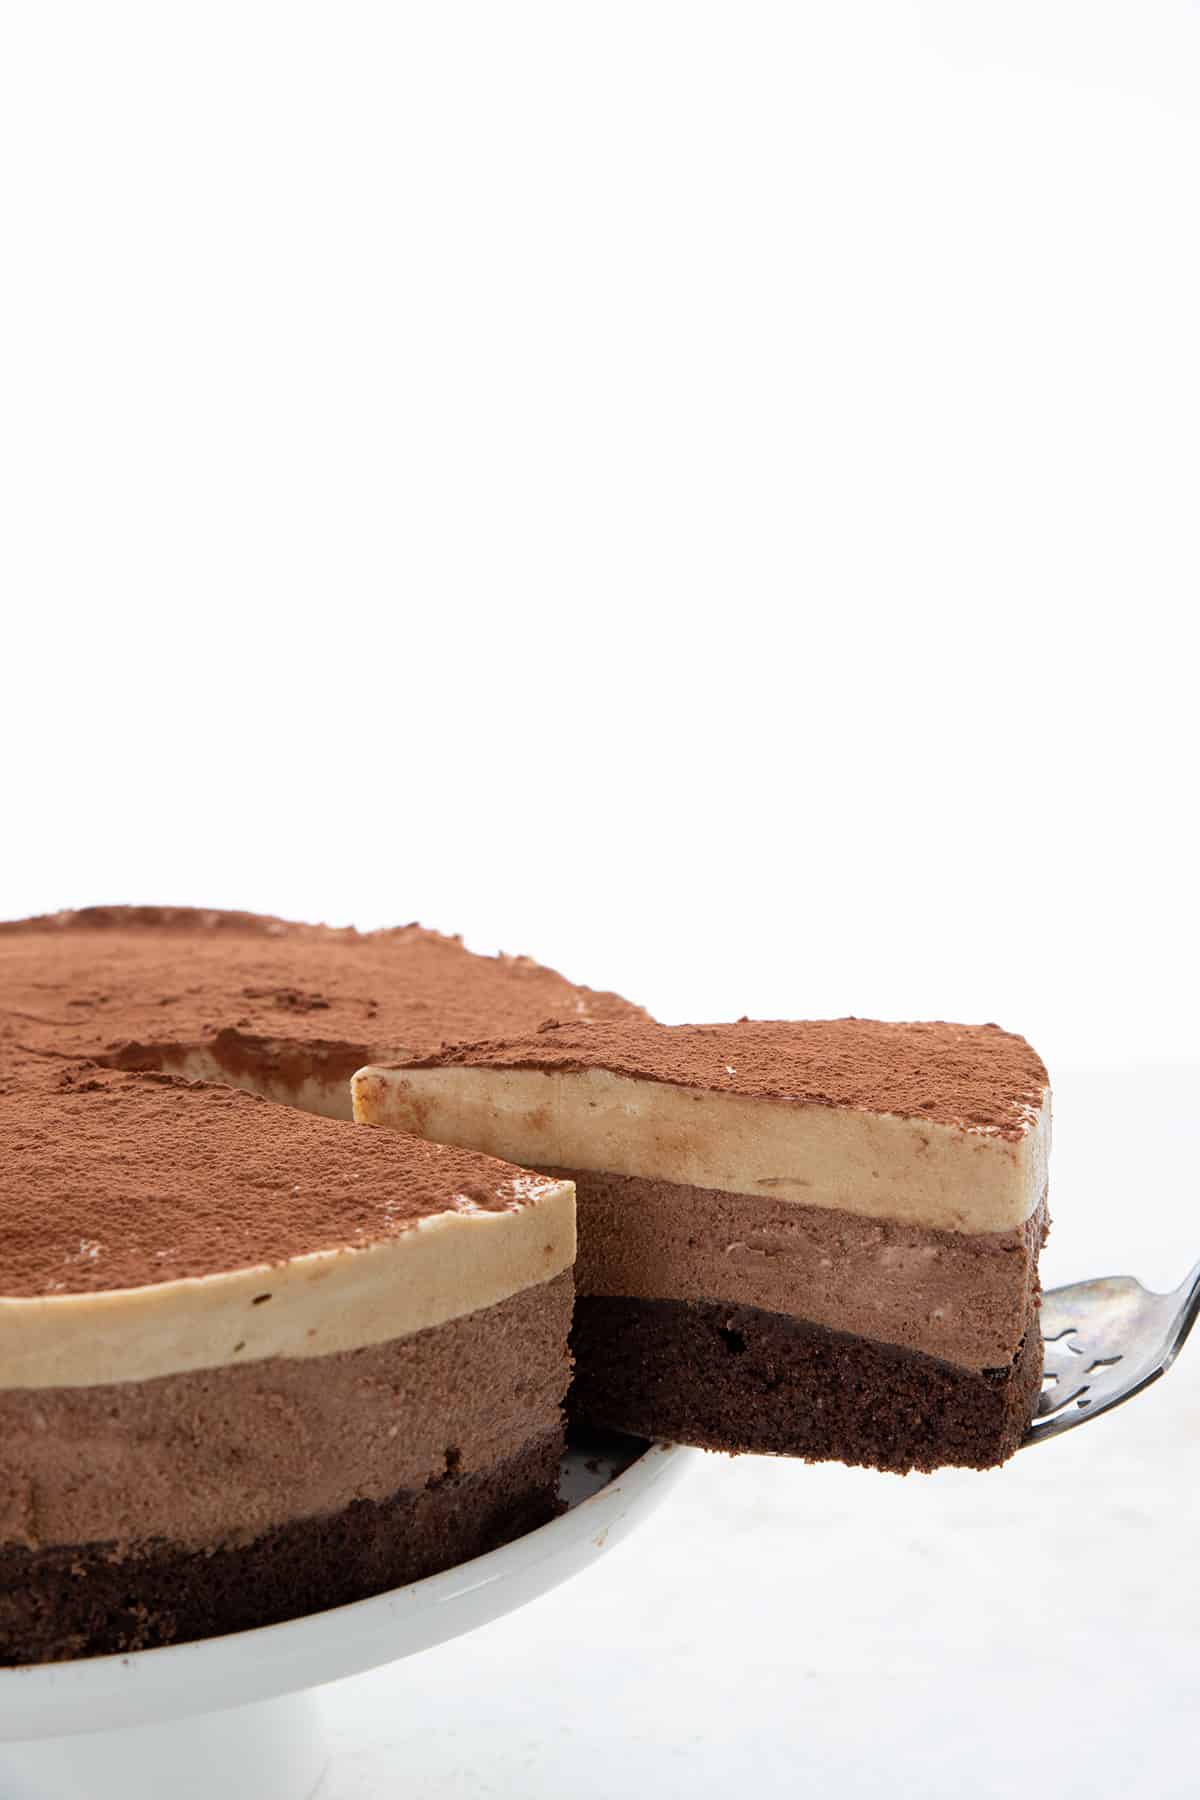 A slice of keto chocolate espresso mousse cake being lifted away from the main cake.